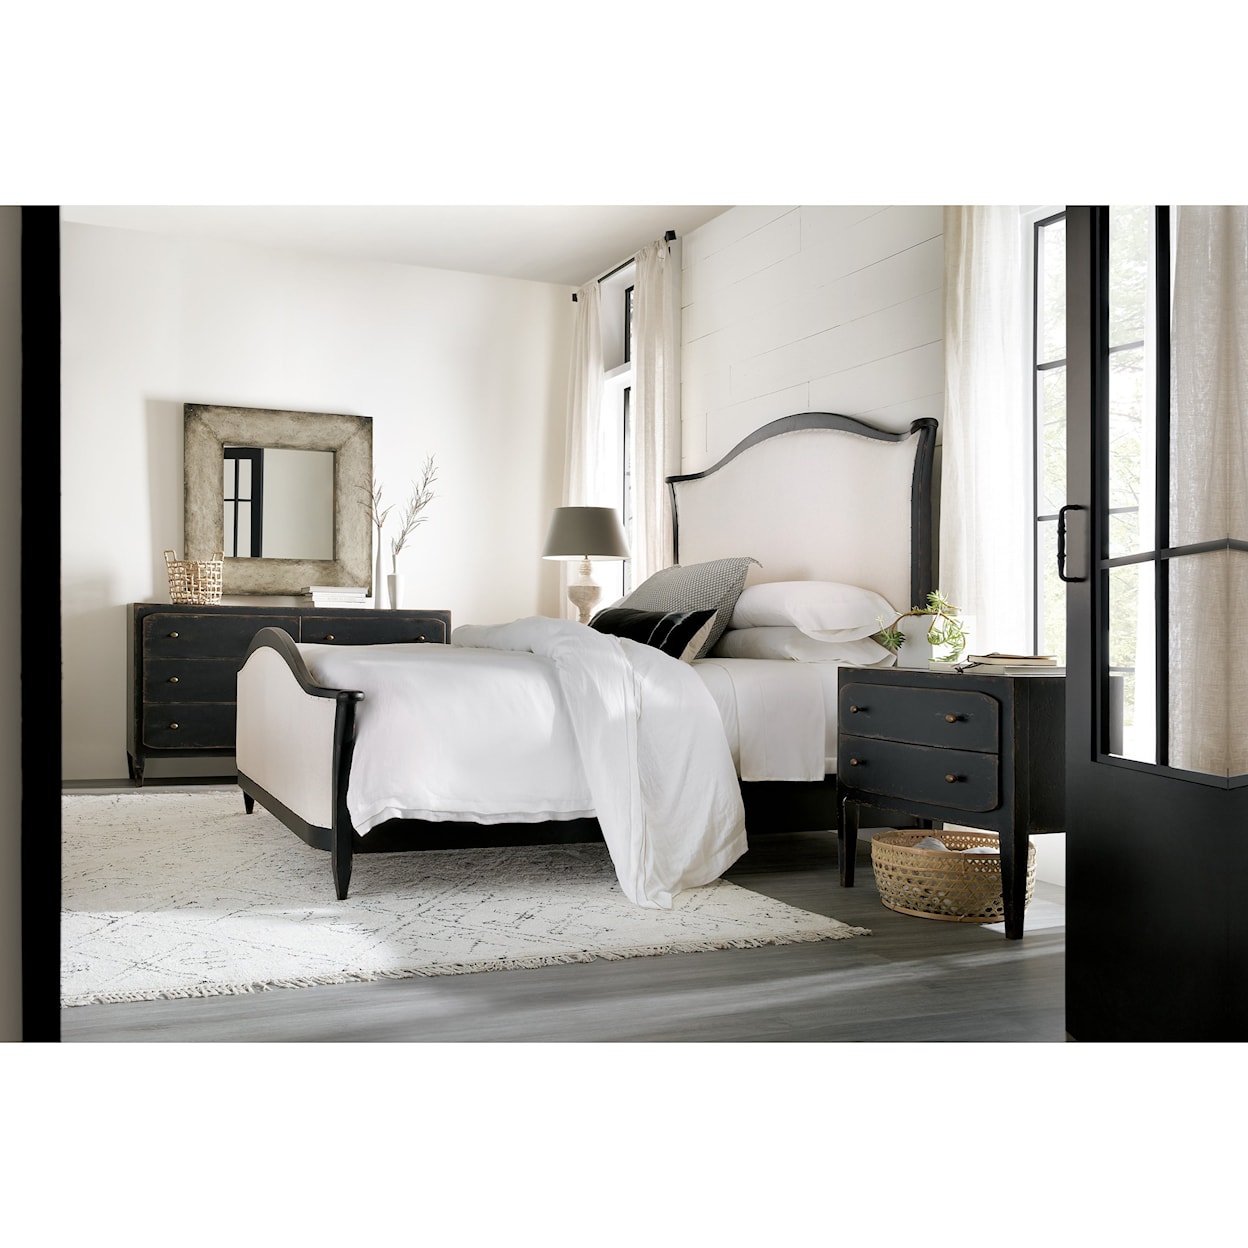 Hooker Furniture Ciao Bella California King Upholstered Bed